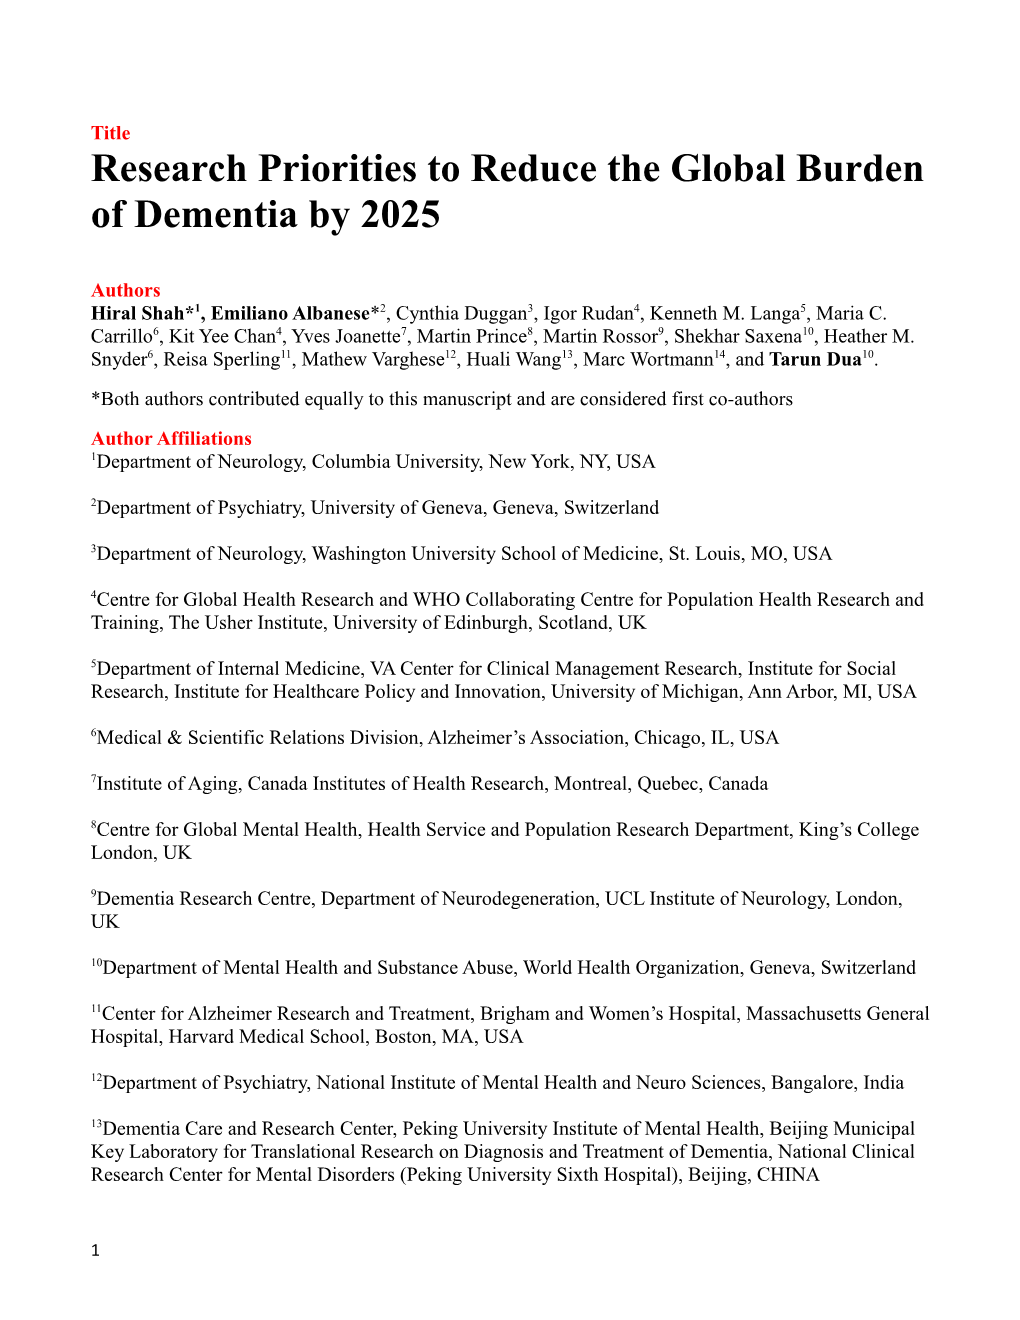 Research Priorities to Reduce the Global Burden of Dementia by 2025